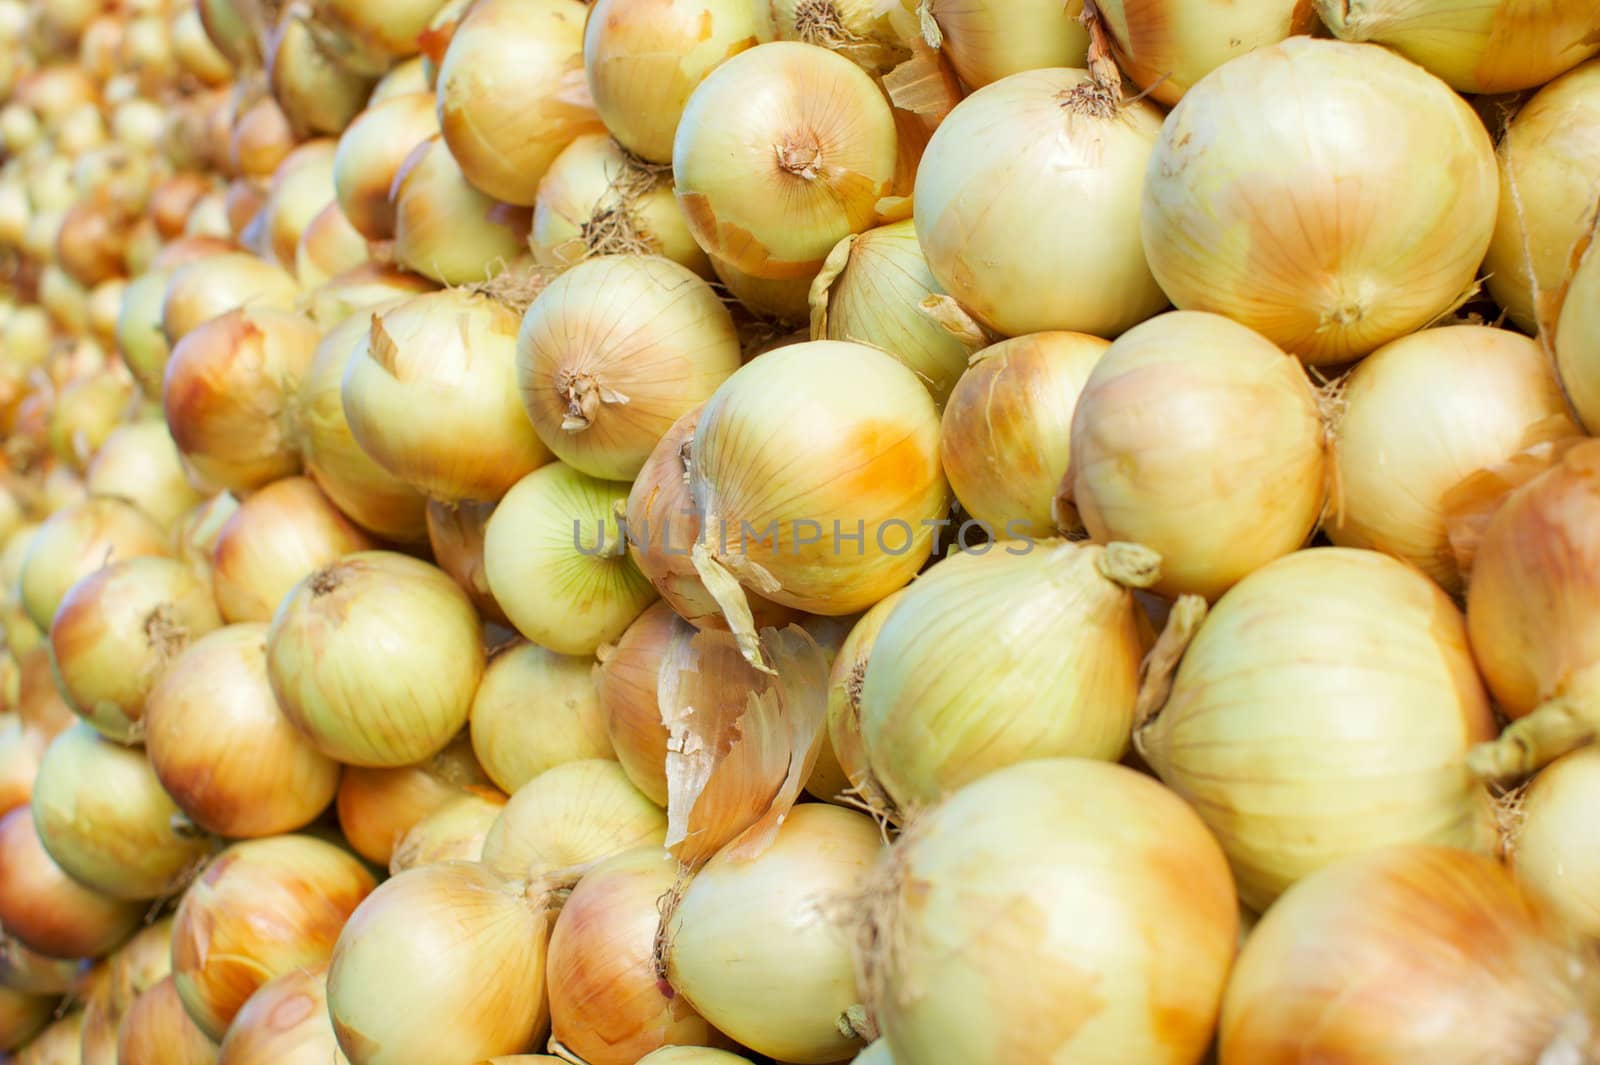 a sea of yellow onions at the Farmer's market